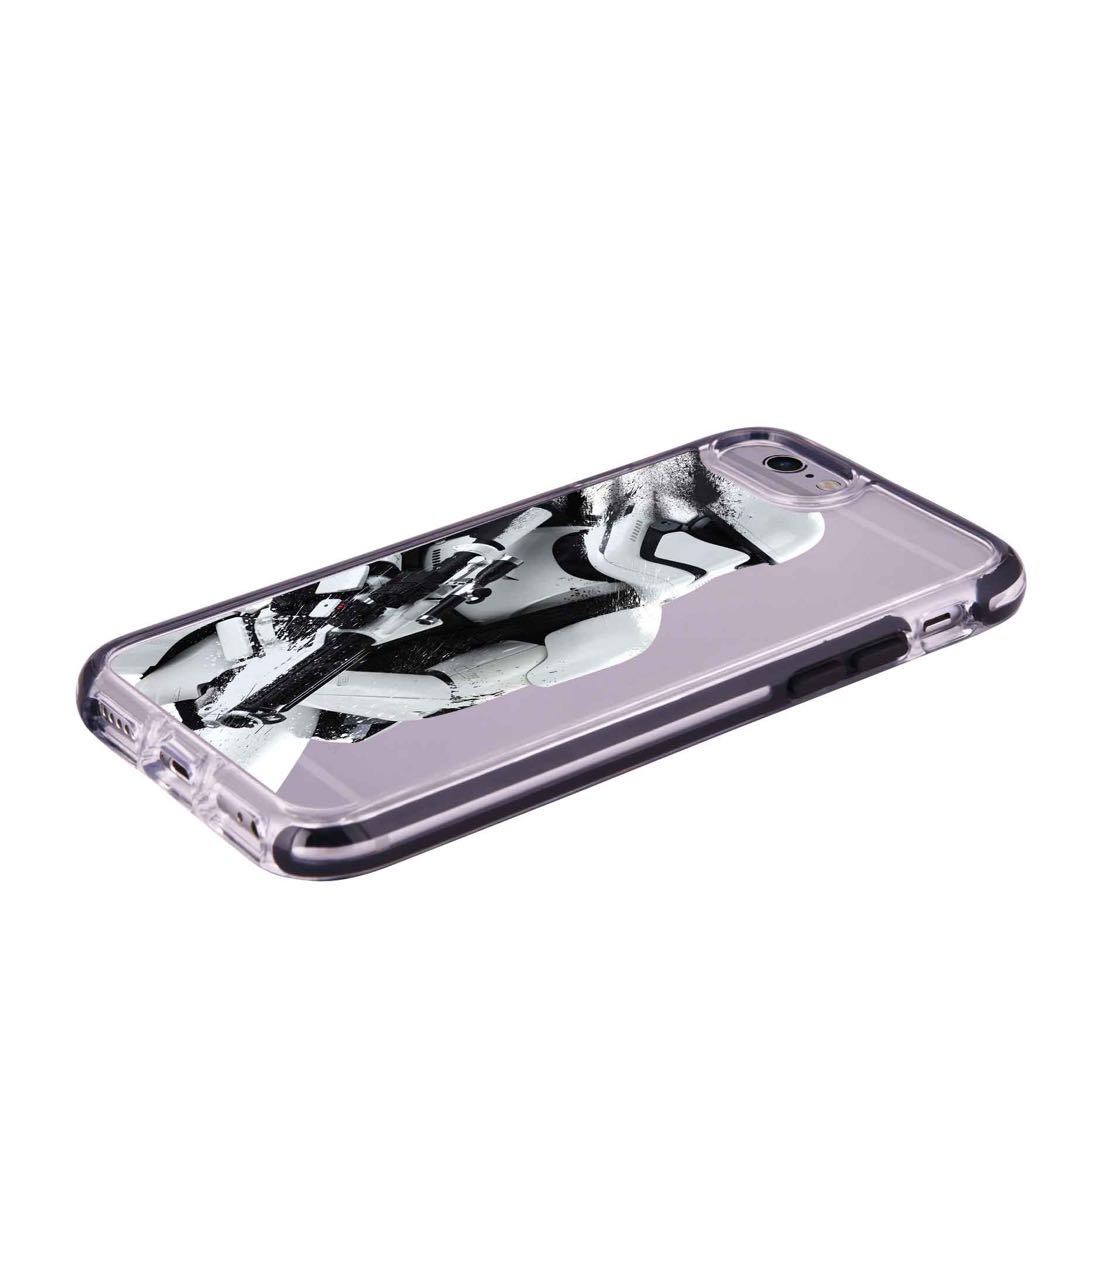 Trooper Storm - Extreme Phone Case for iPhone 6 Plus